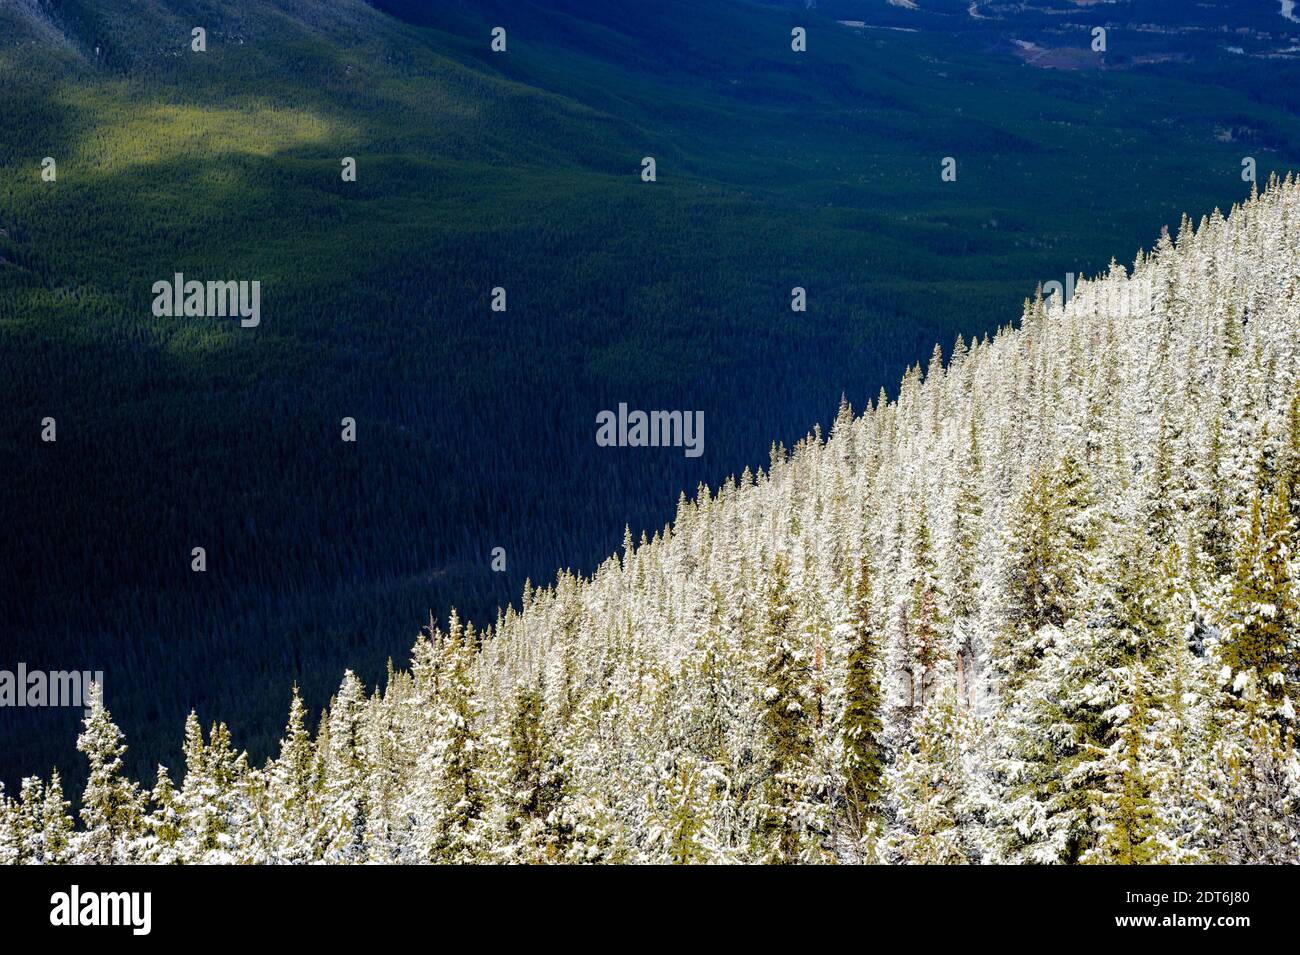 Bright snow-covered trees on mountain slope against dark forest, near Banff, Alberta, Canada. Stock Photo